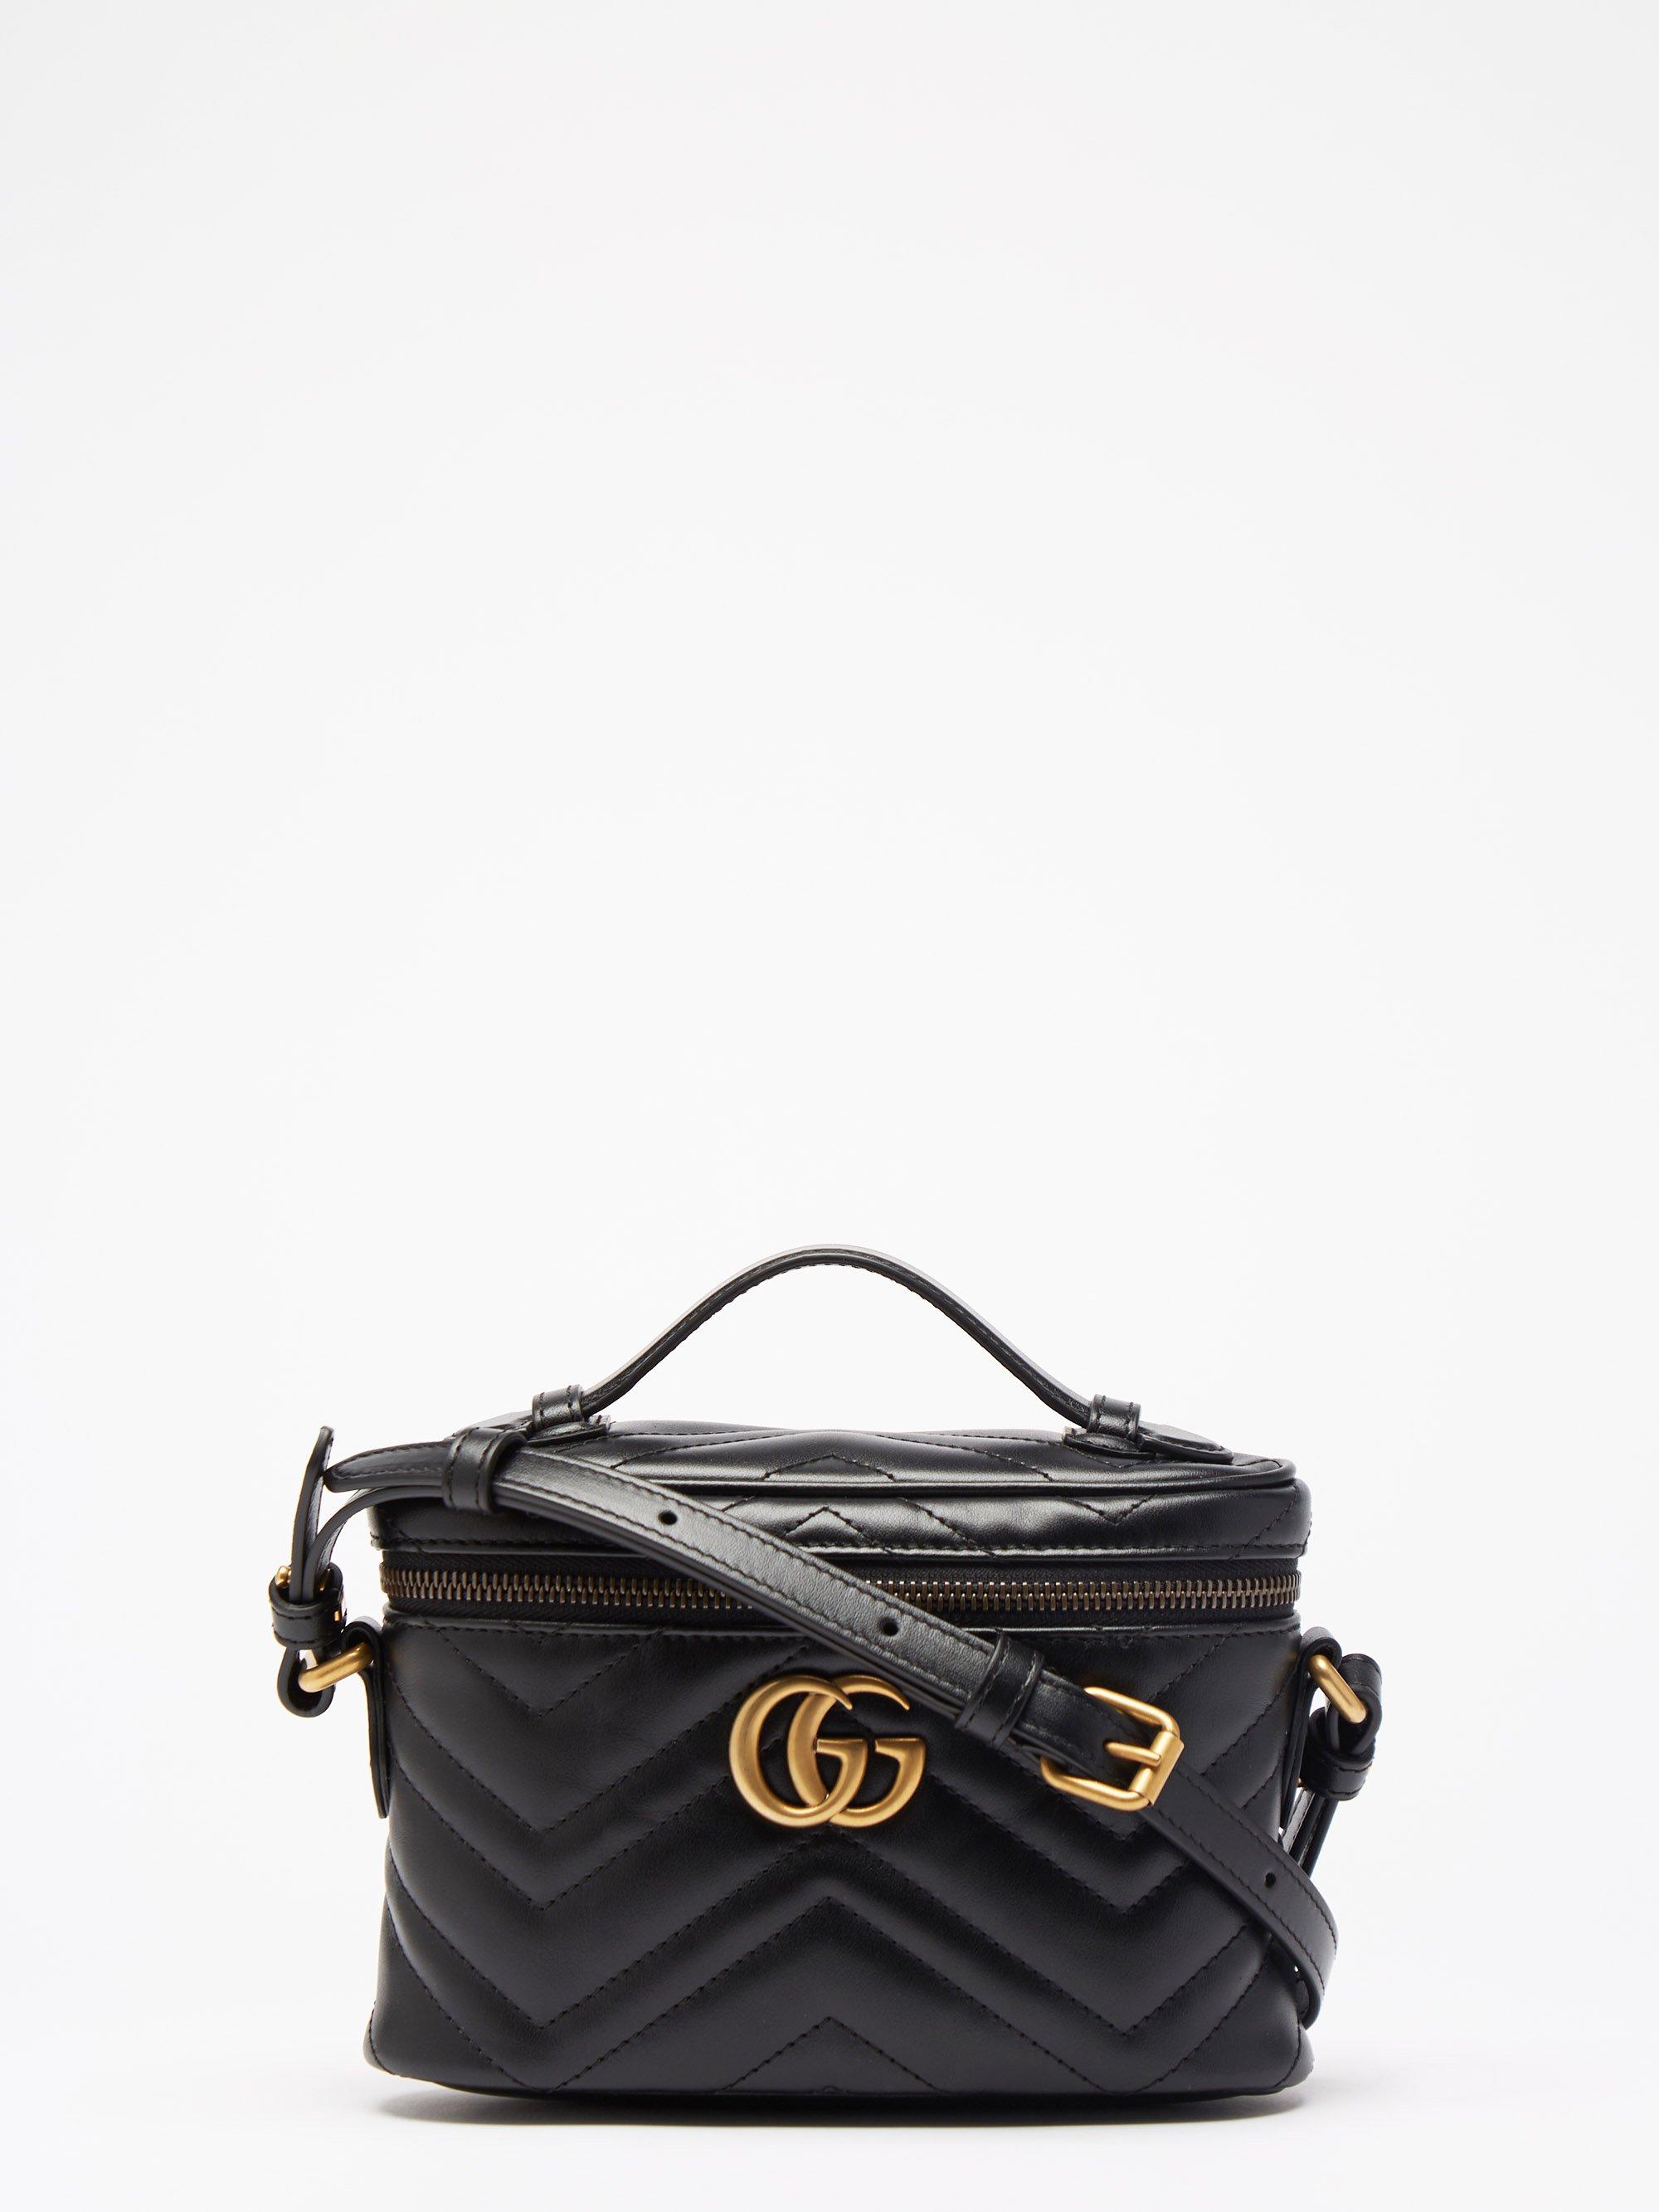 Black GG Marmont leather cross-body bag, Gucci